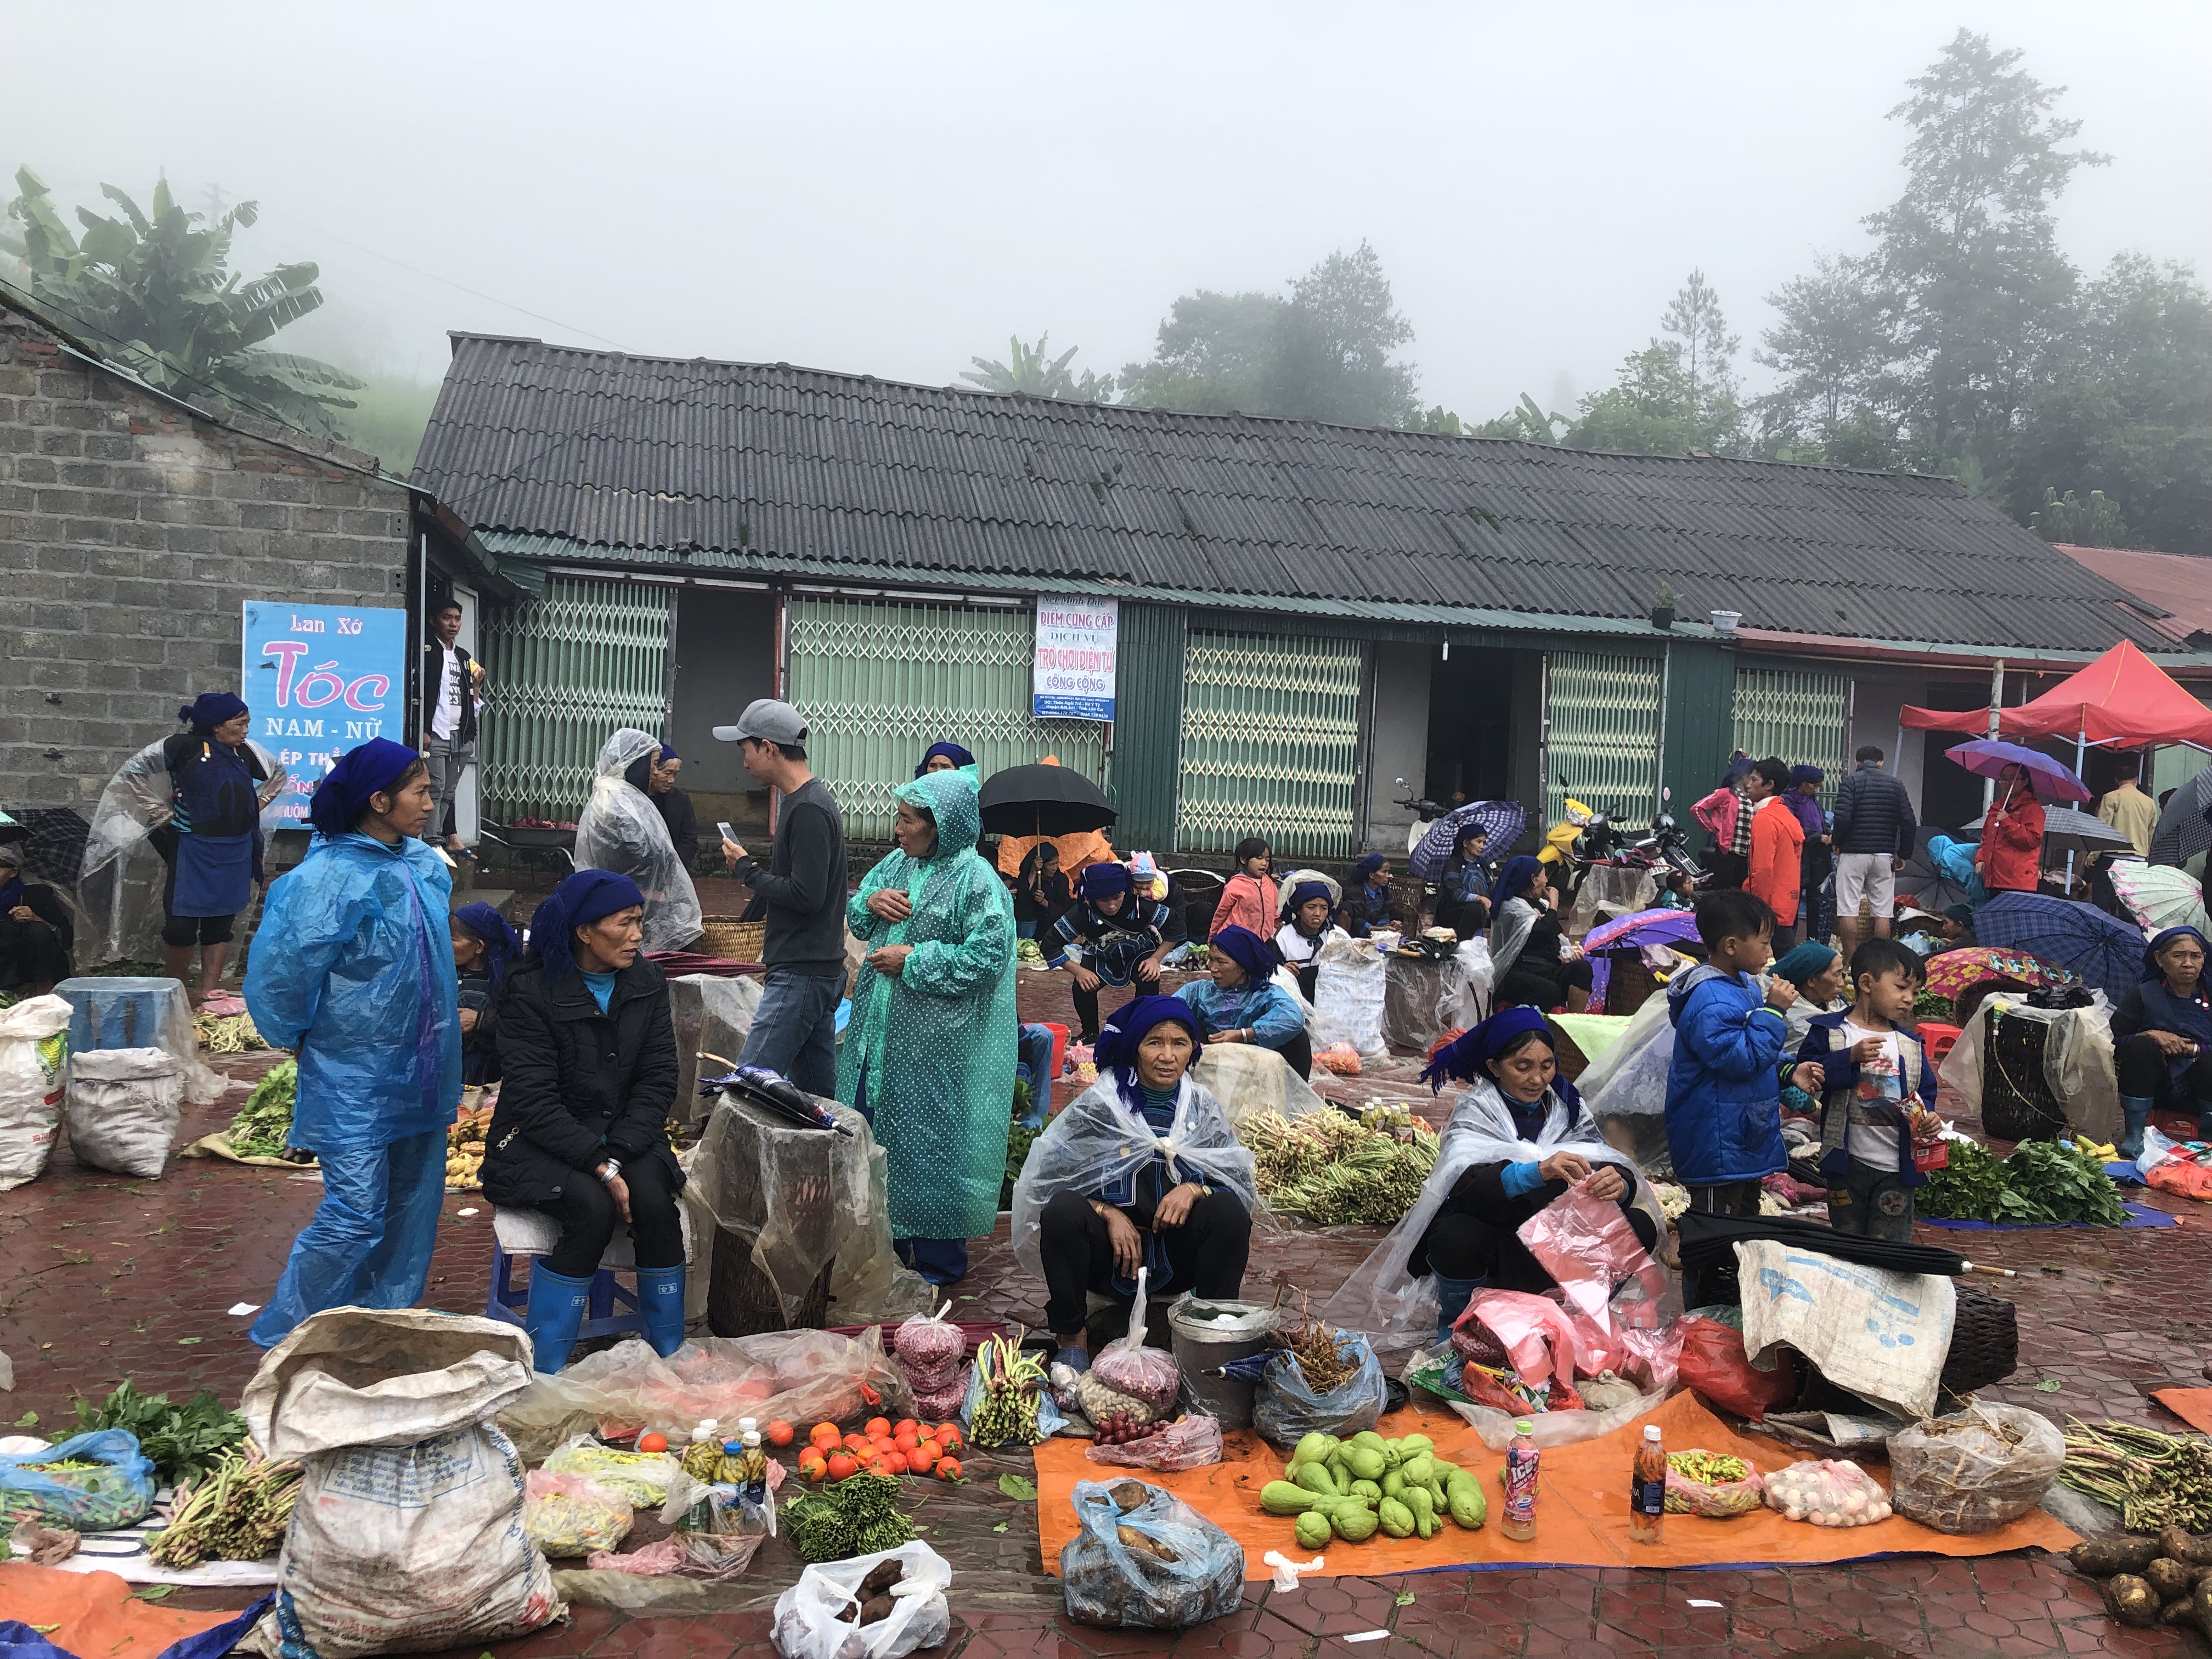 Experience the Lao Cai Phien market